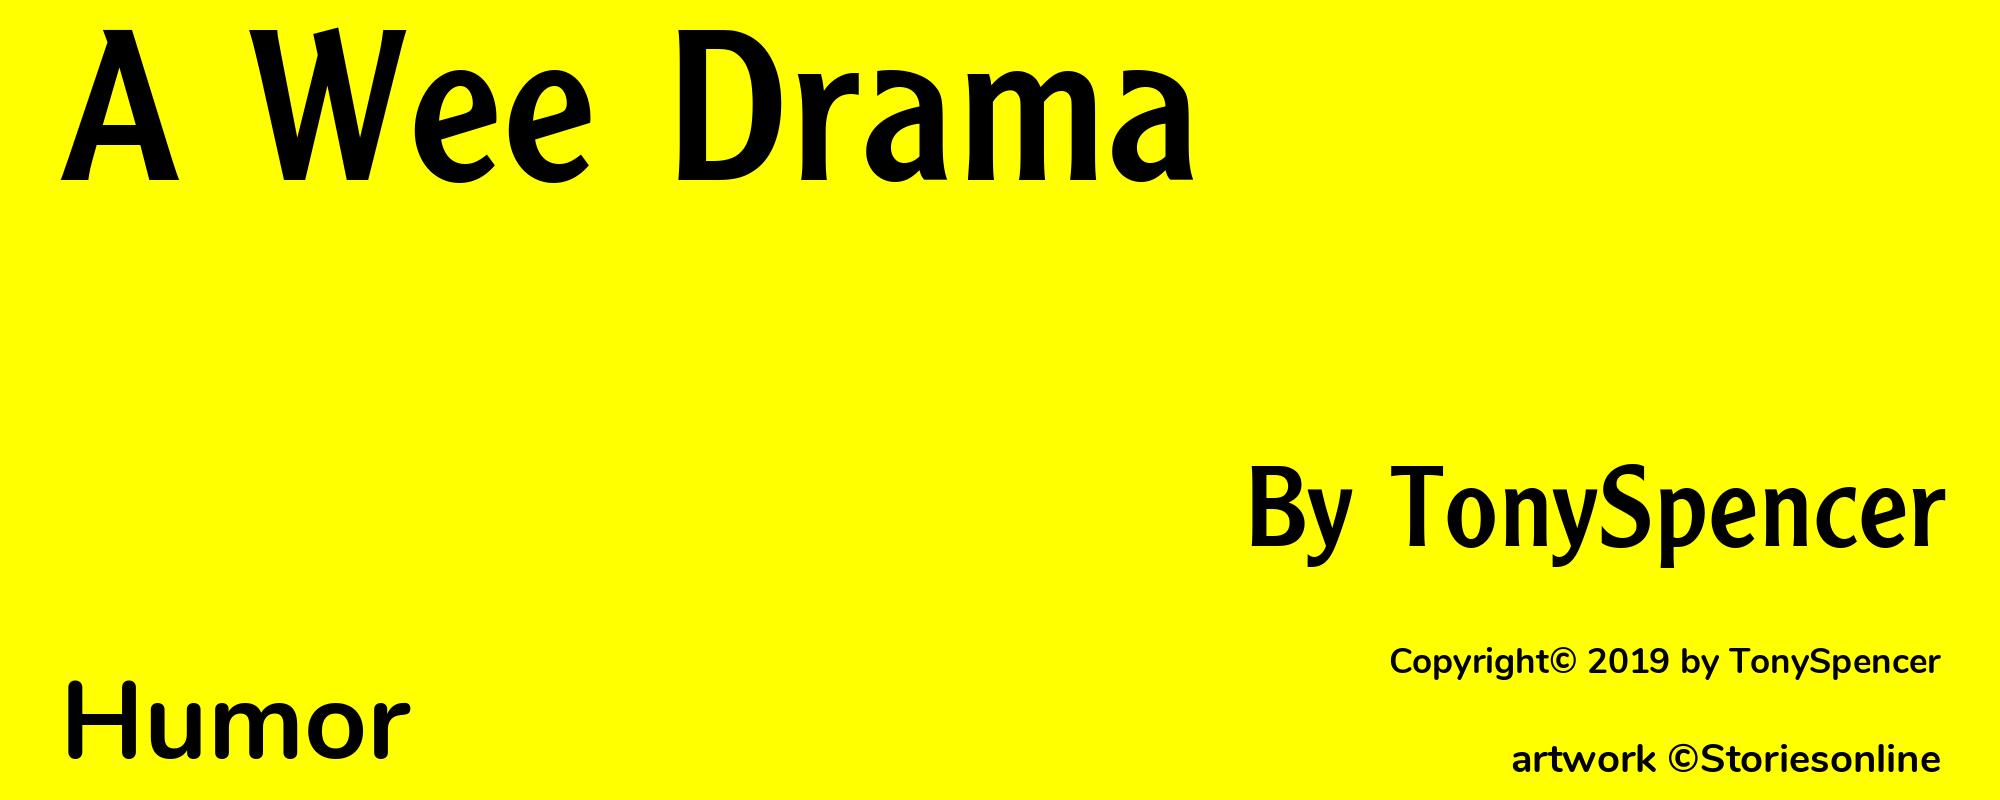 A Wee Drama - Cover